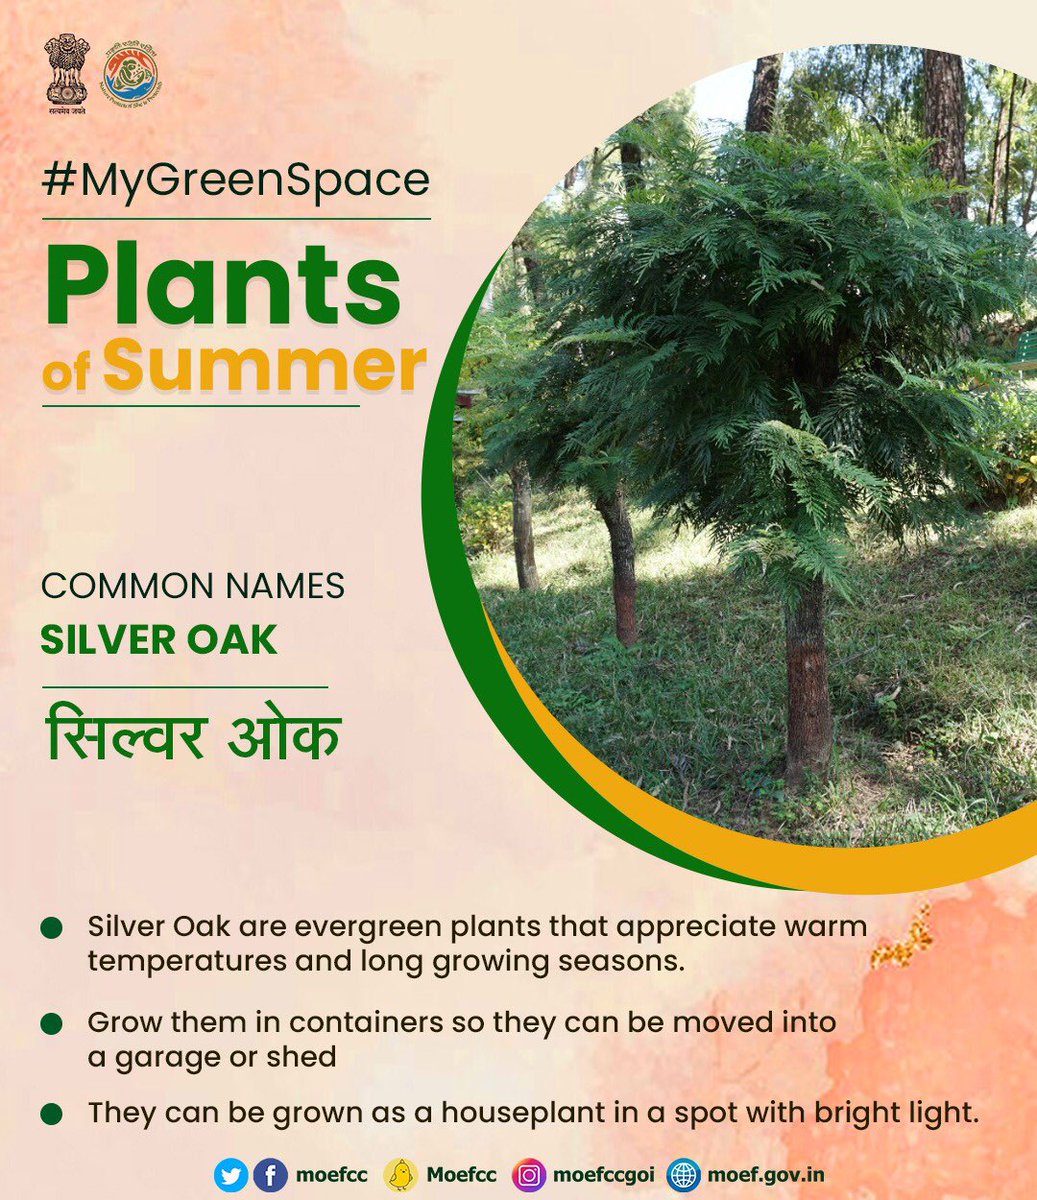 #PlantsofSummer for your Indoor and Outdoor Spaces, which look refreshing and colourful. #MyGreenSpace